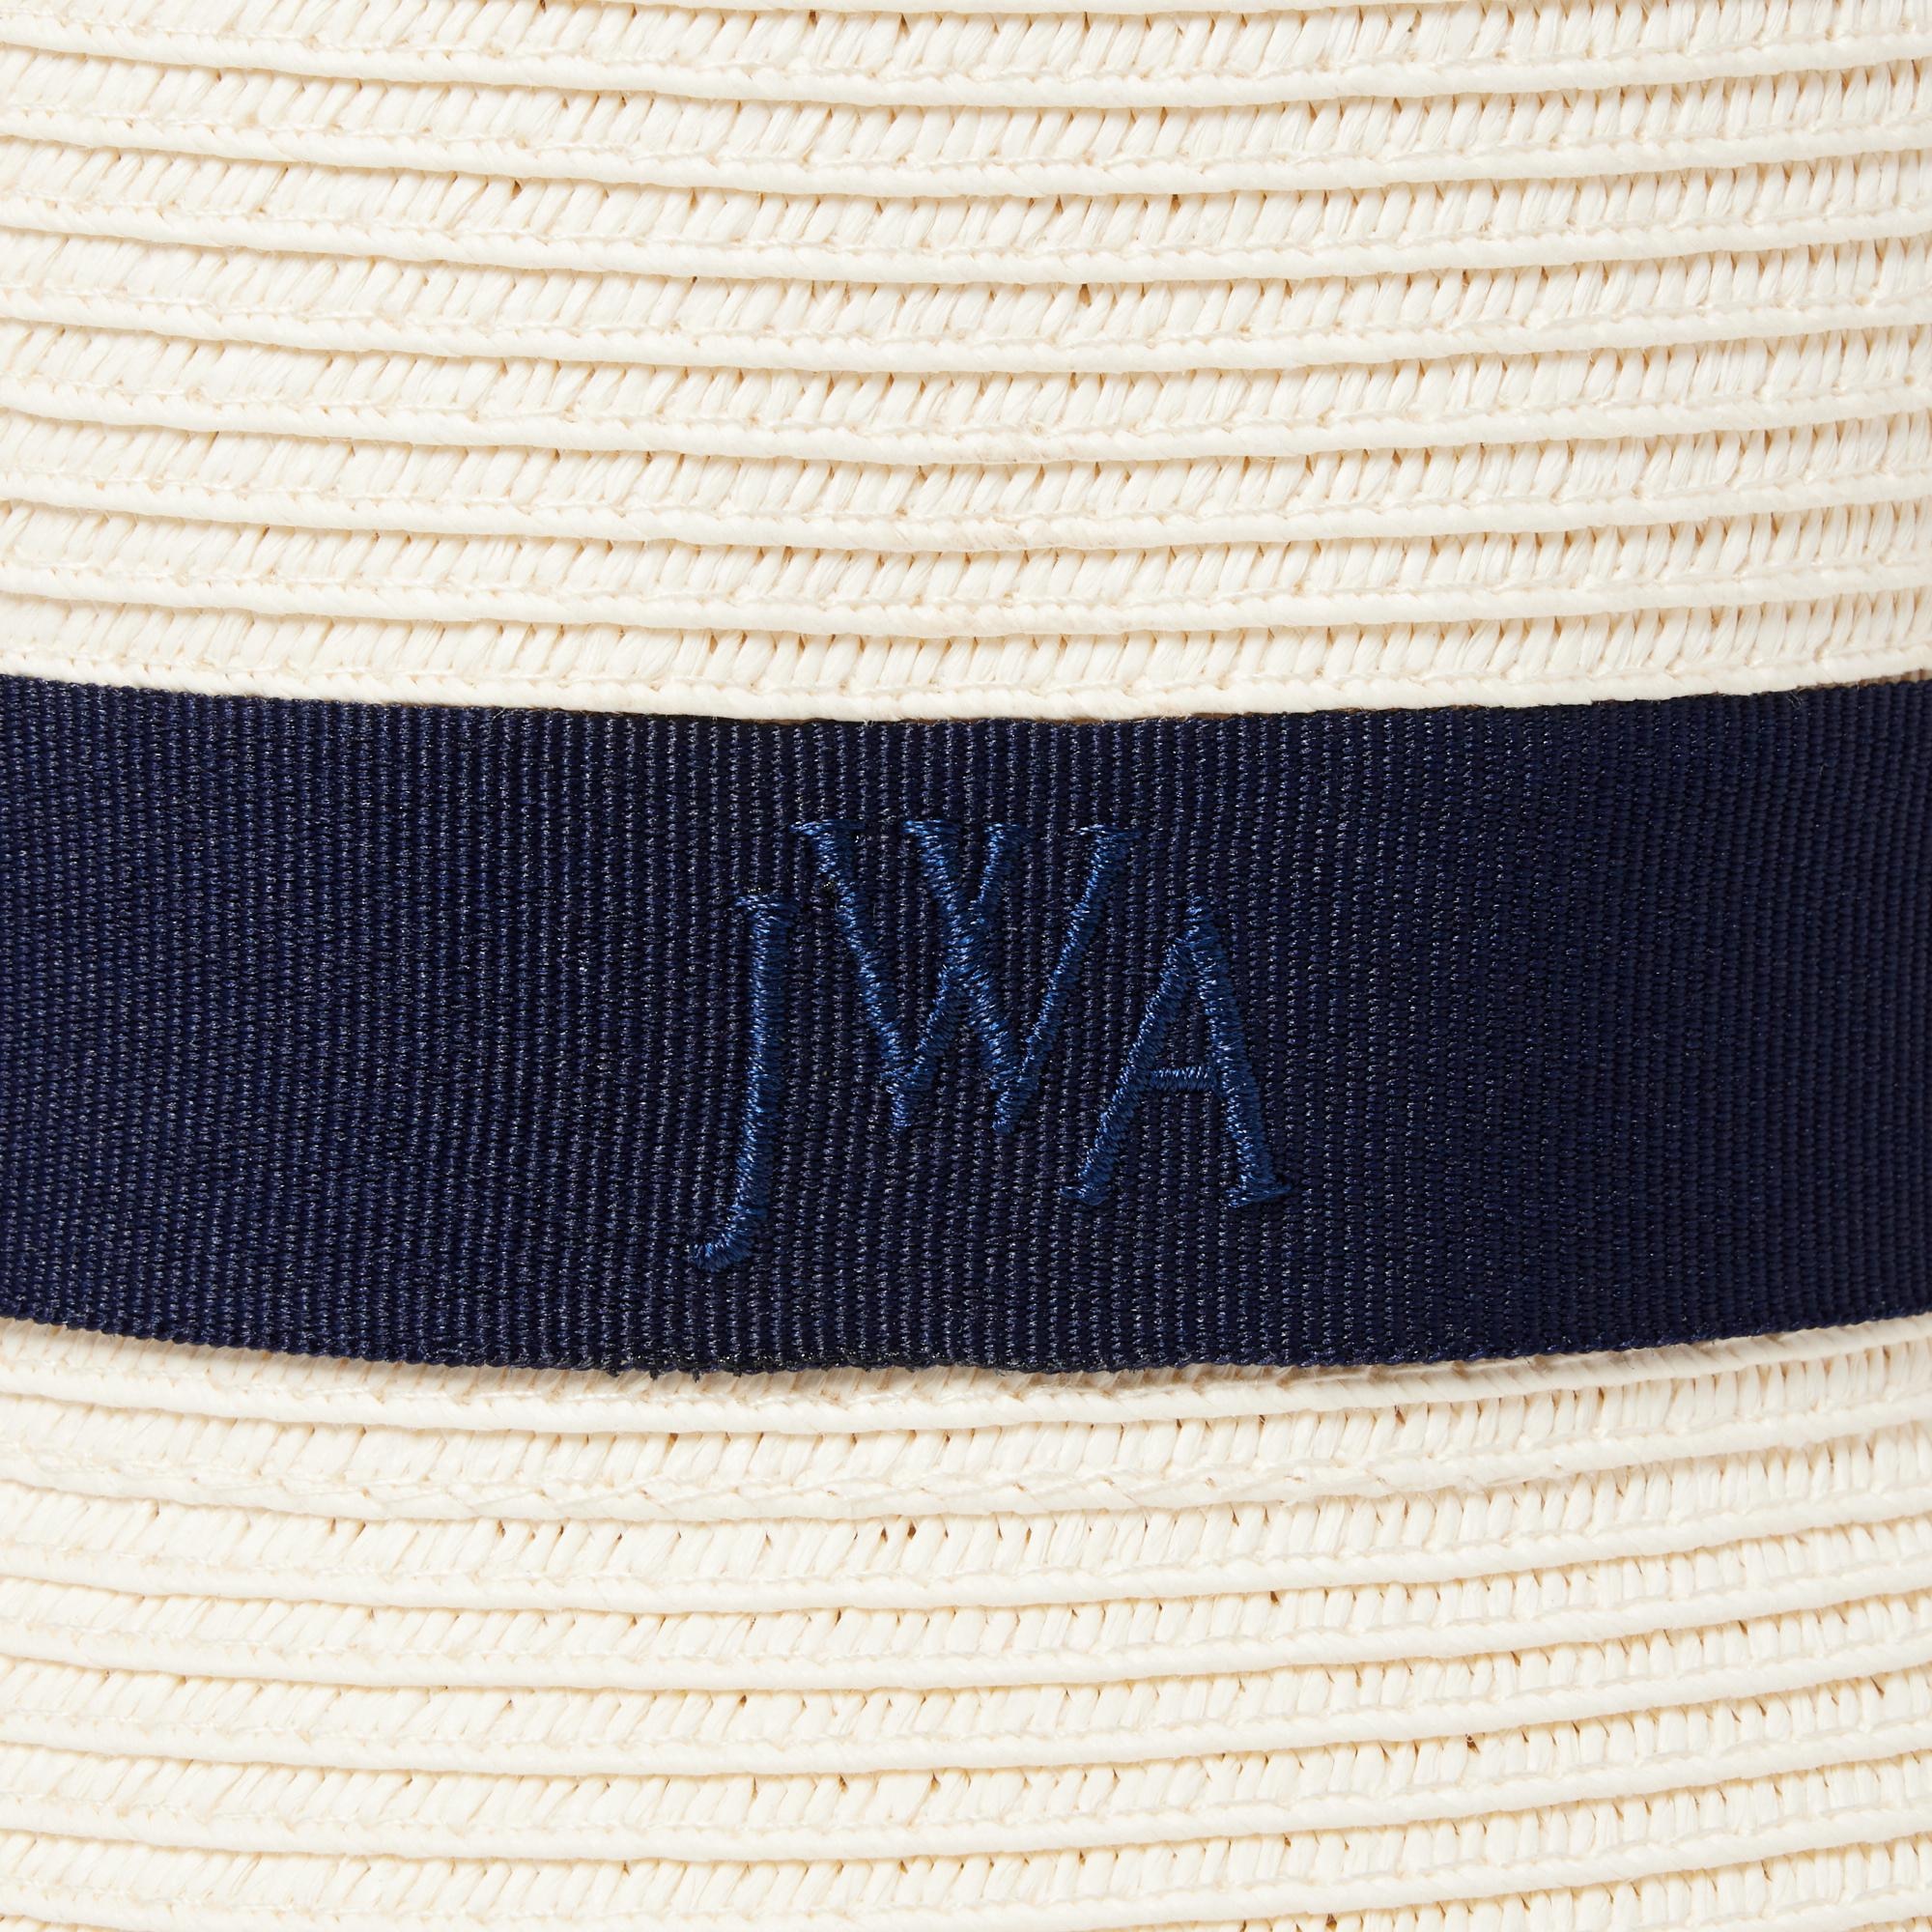 JW Anderson x Uniqlo Hickory Bucket Hat Mens Fashion Watches   Accessories Cap  Hats on Carousell